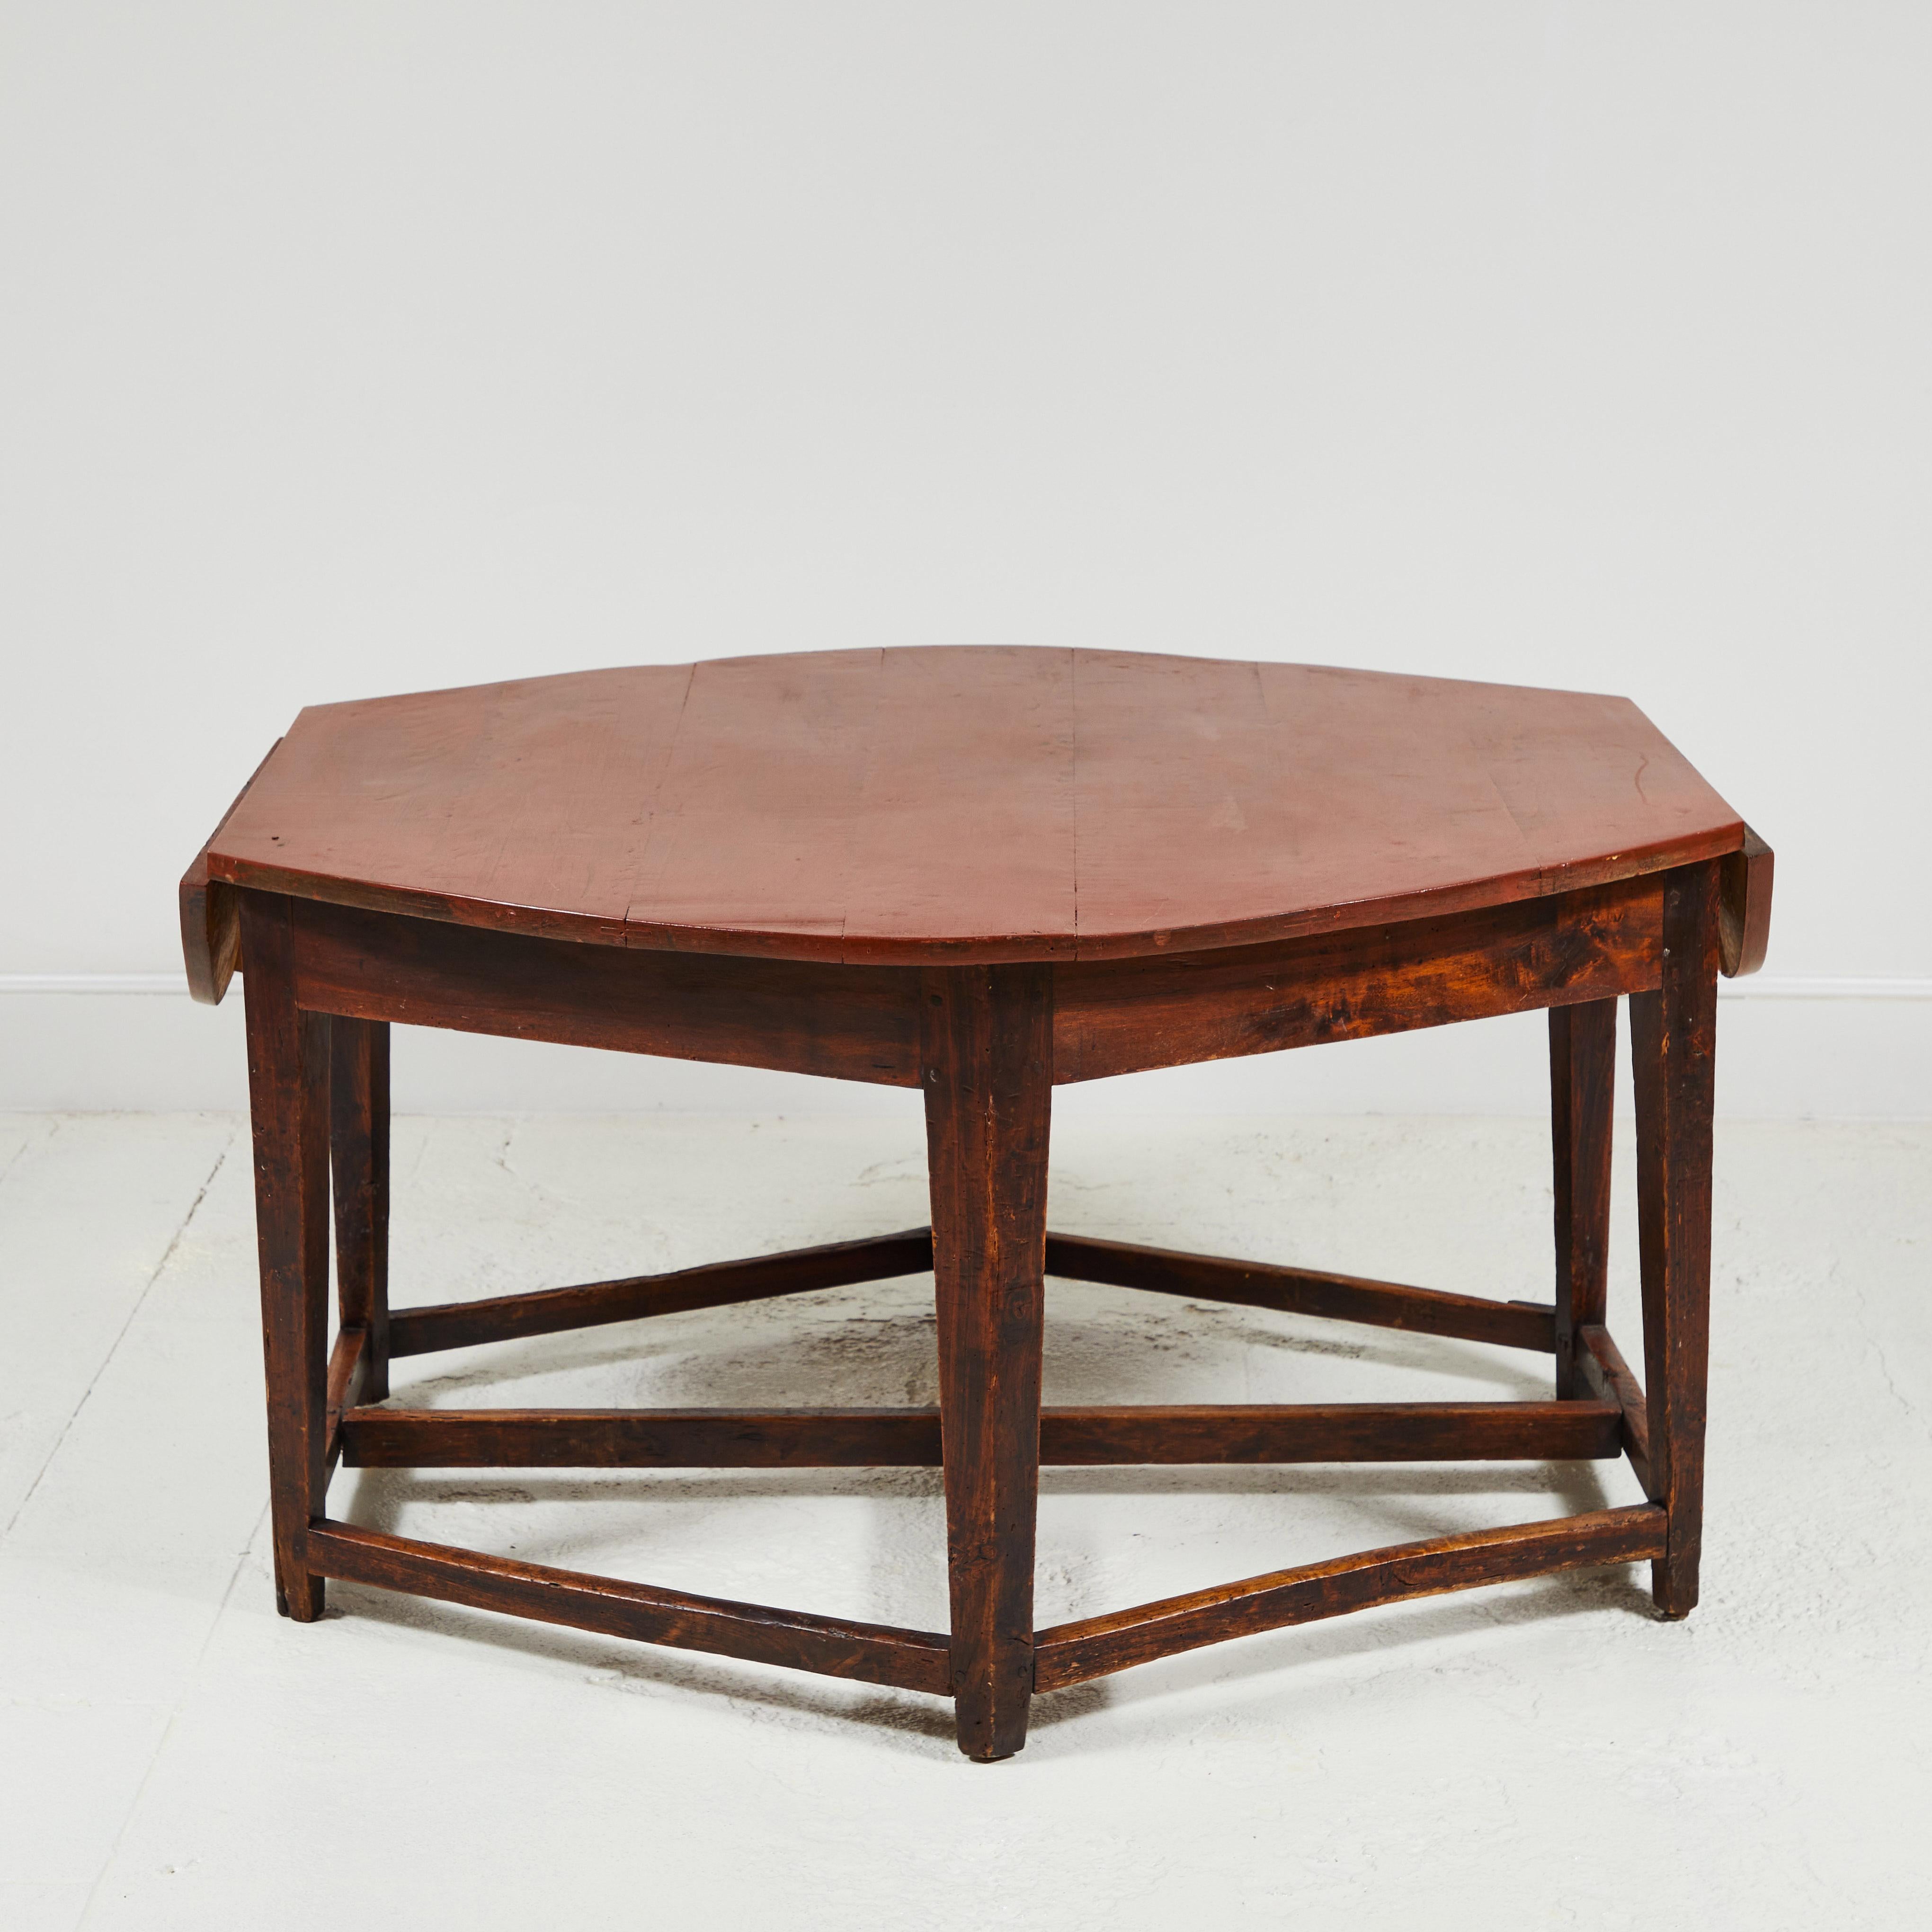 Rustic early 19th century French hexagonal table with two, drop leaves. Table offers two drawers, one of which is signed circa 1815. Cross base has beautiful aged markings.